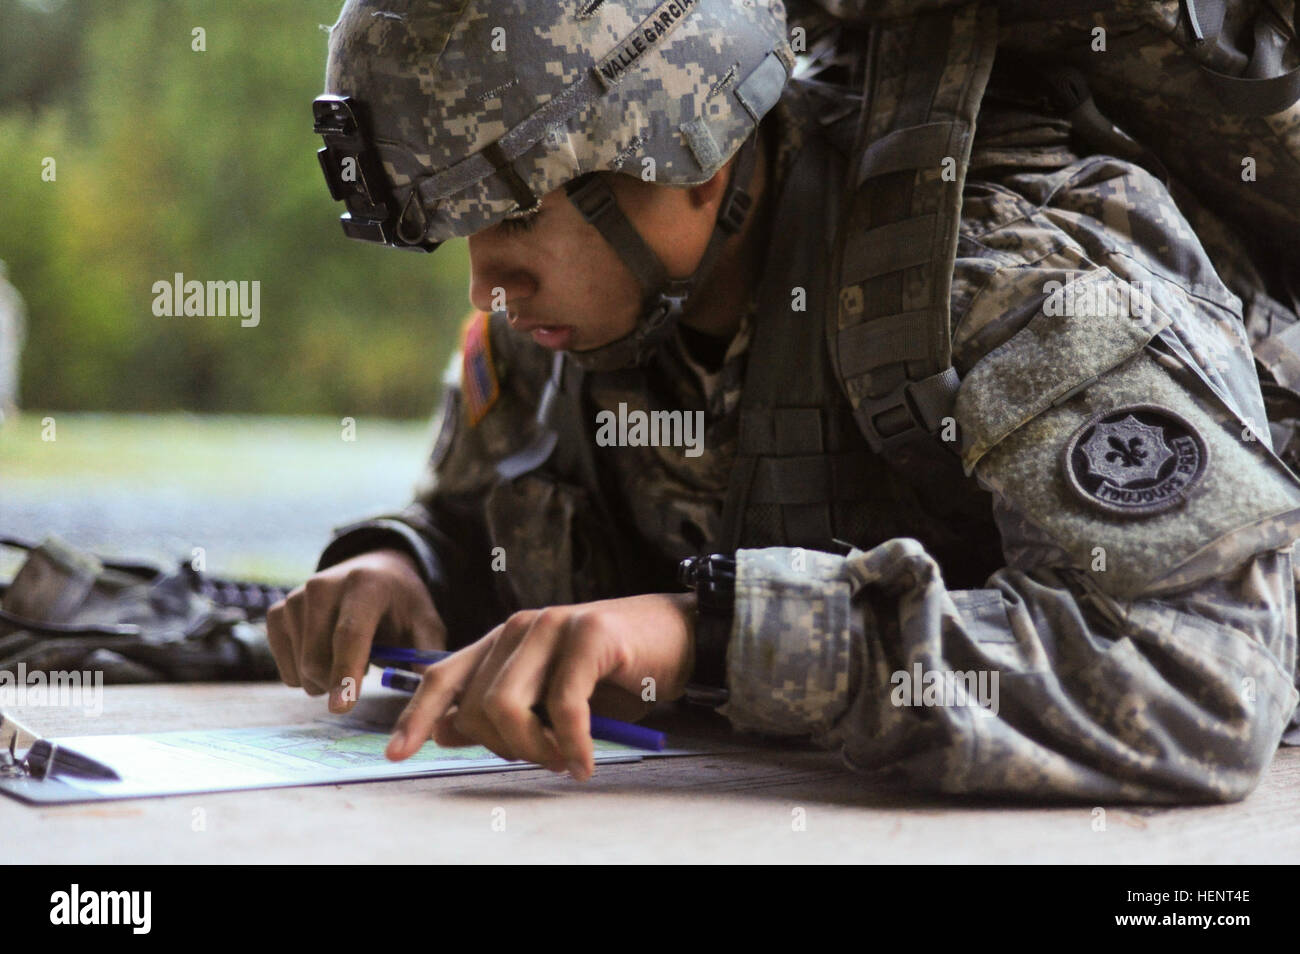 U.S. Army Spc. Felix Valle Garcia, assigned to C Troop, 1st Squadron, 2nd Cavalry Regiment, plots coordinates on a map during the land navigation portion of the  European Best Warrior Competition in Grafenwoehr, Germany, Sept. 14, 2014. The competition is a weeklong event that pushes Soldiers to the limits of their physical stamina, bearing, knowledge, adaptability and technical and tactical skills. The best warriors are ready and resilient Soldiers who live the Army values and lead from the front. (U.S. Army photo by Staff Sgt. Pablo N. Piedra/Released) European Best Warrior Competition 2014  Stock Photo